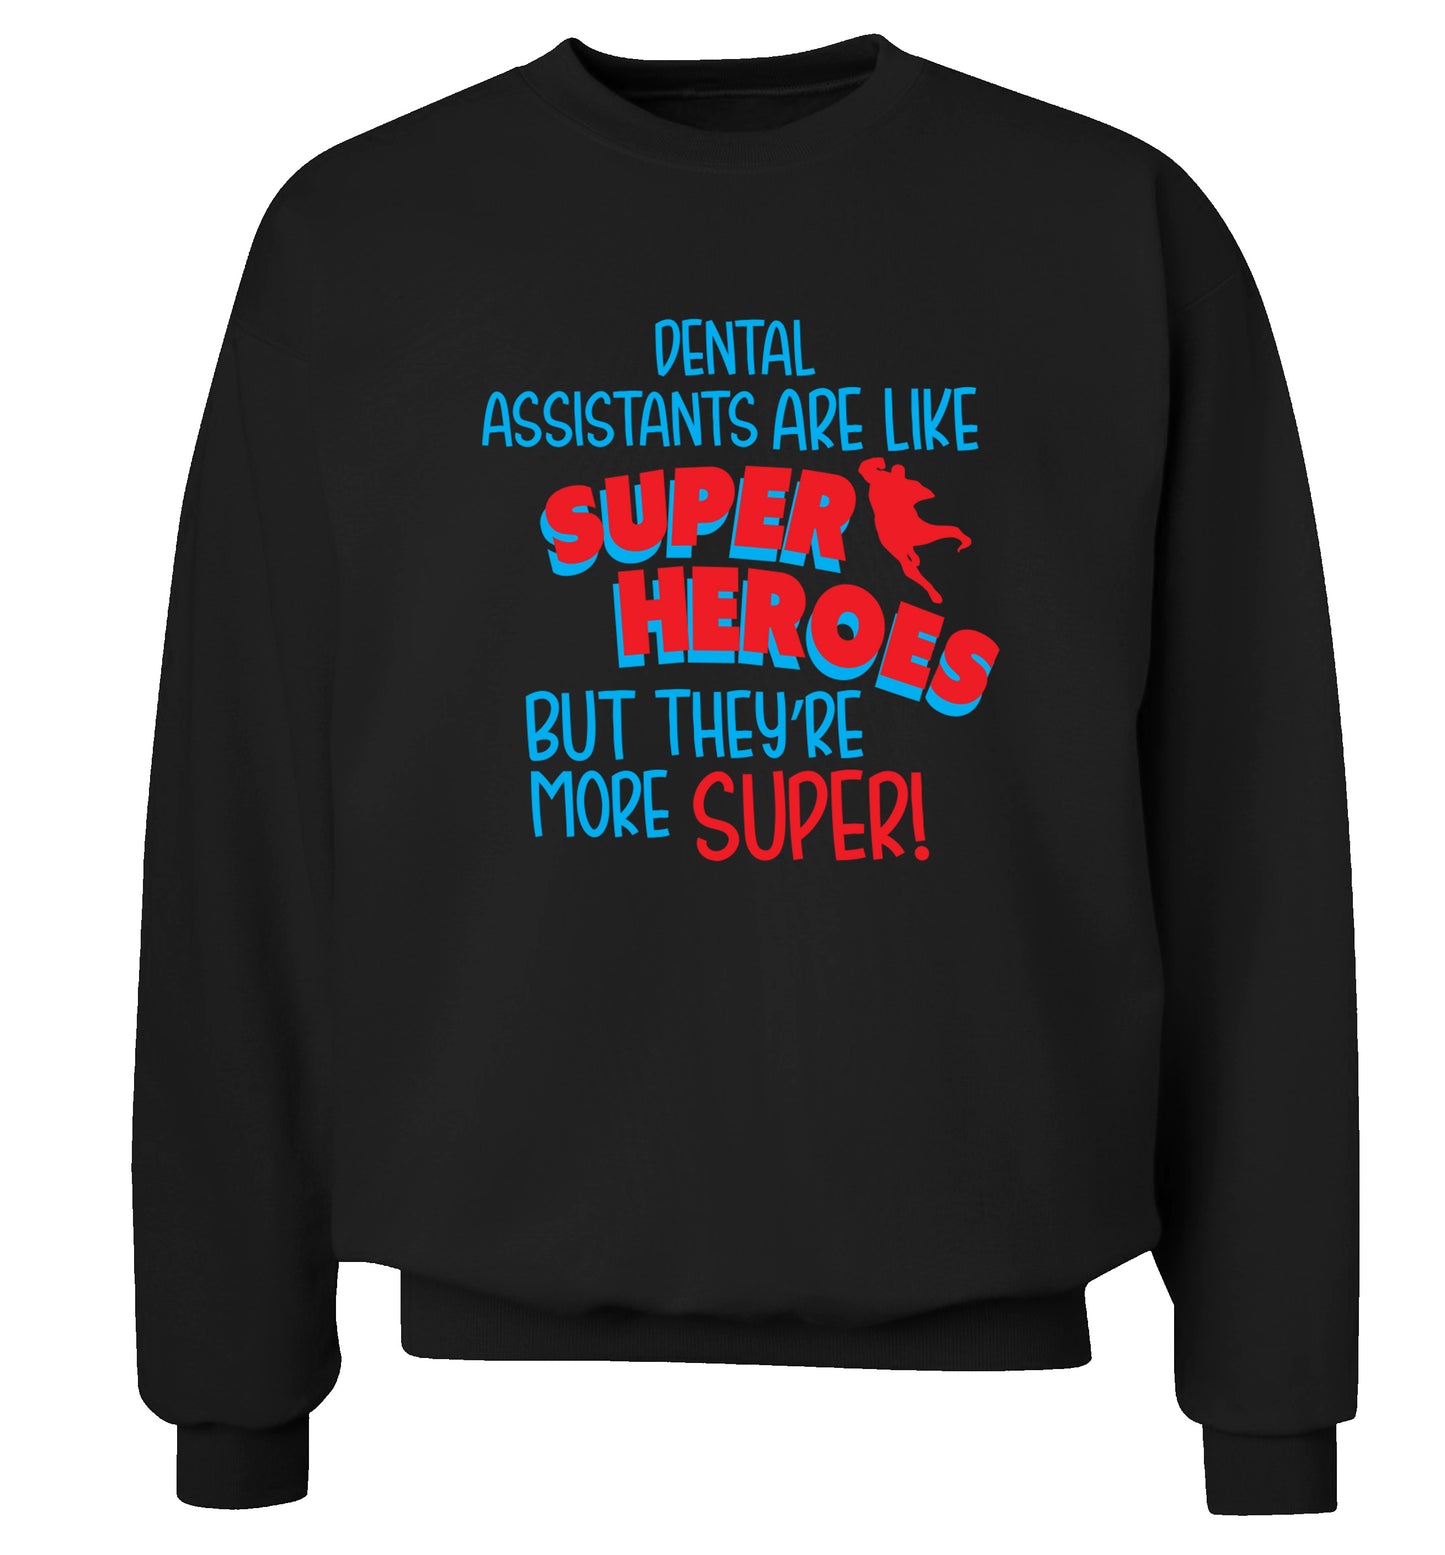 Dental Assistants are like superheros but they're more super Adult's unisex black Sweater 2XL